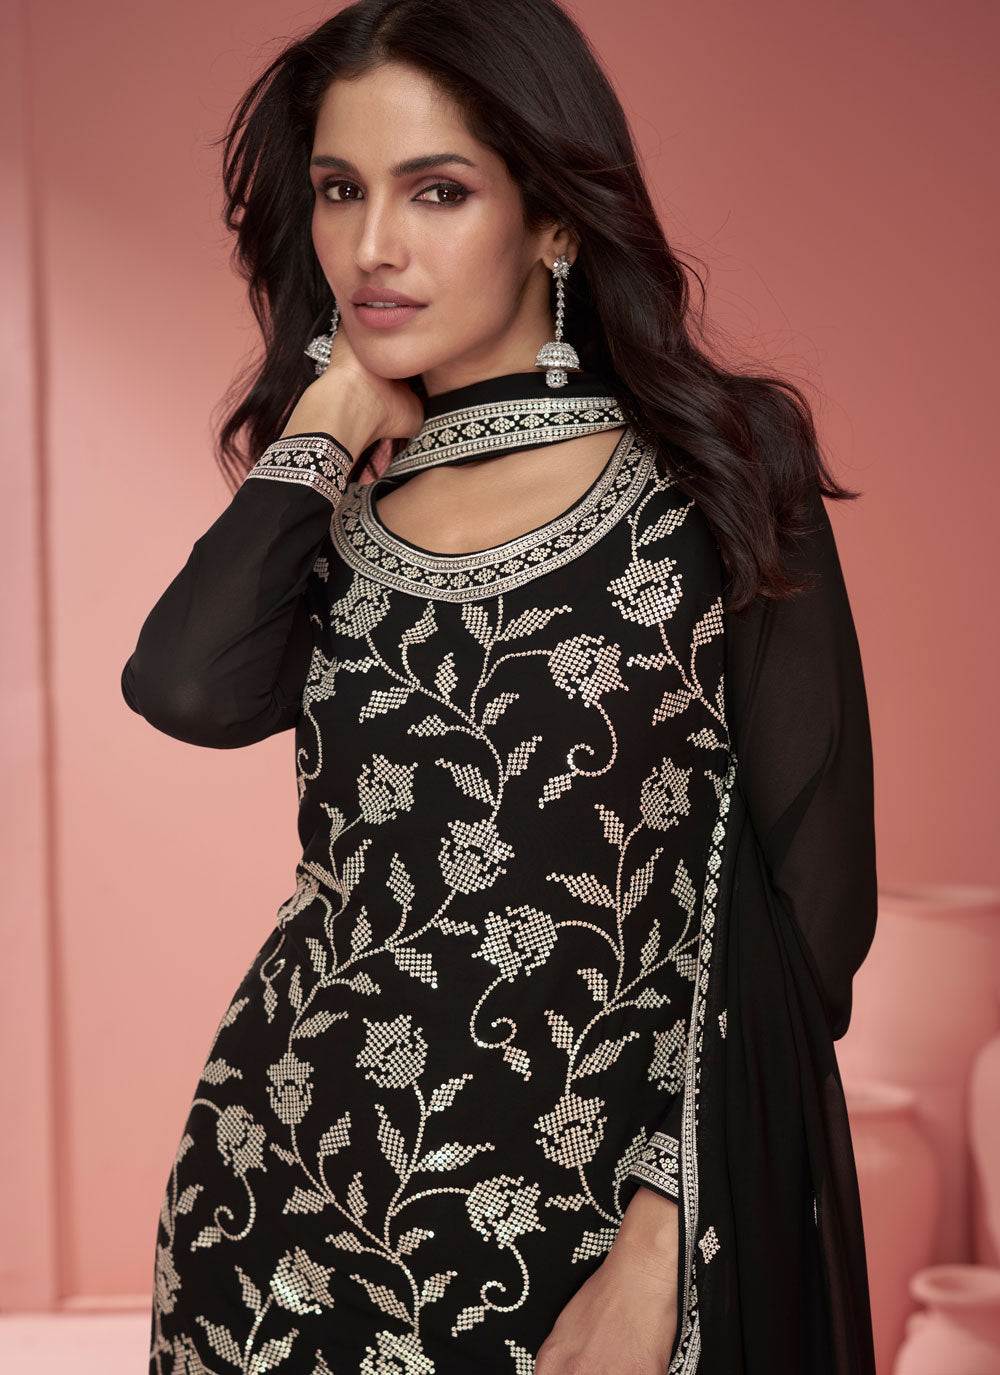 Georgette Salwar Suit With Embroidered Work For Women